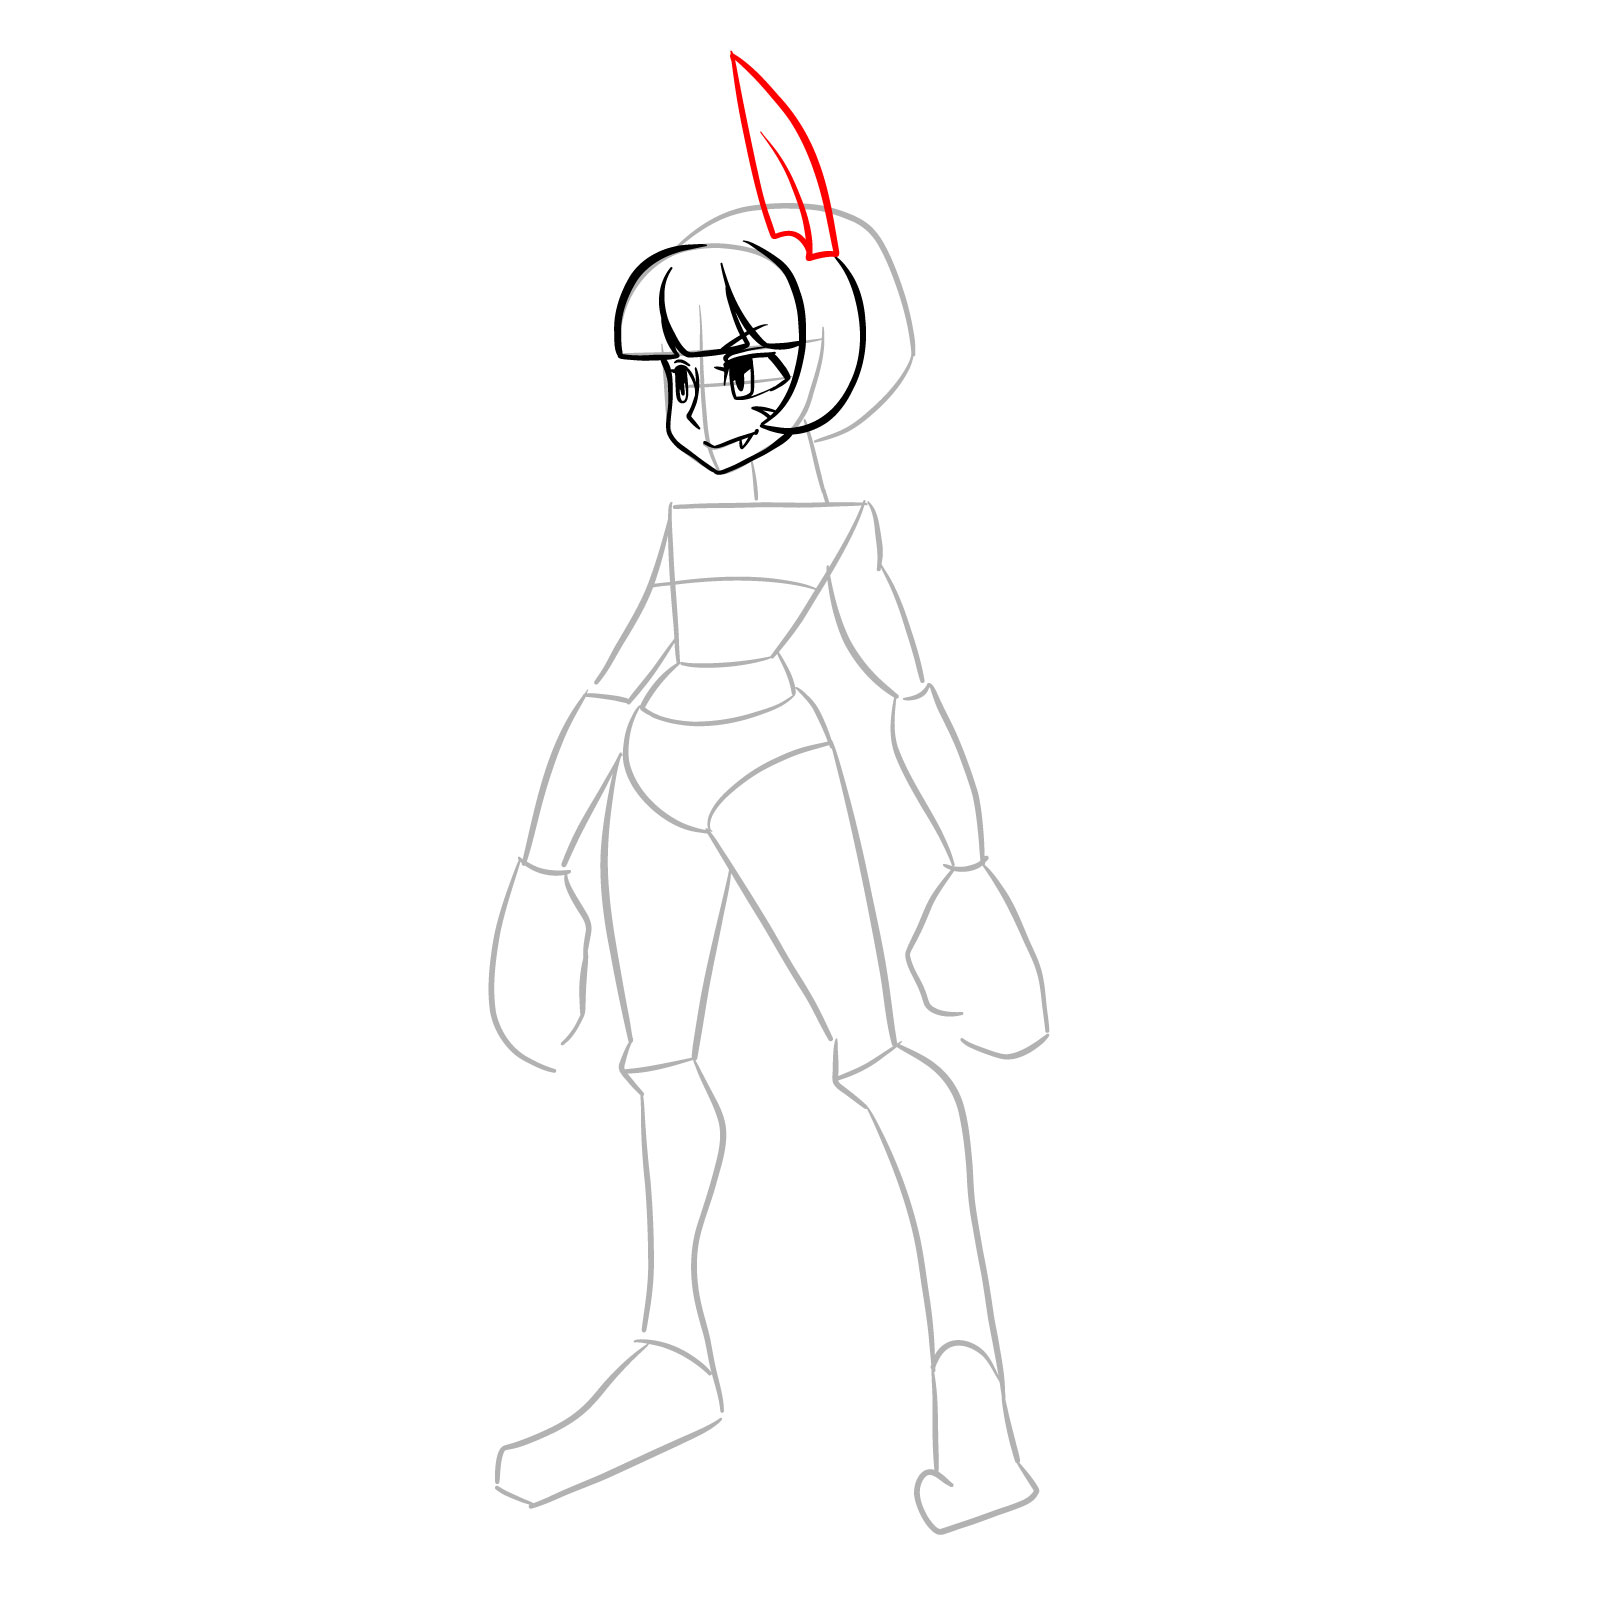 How to draw Ms. Fortune from Skullgirls - step 10